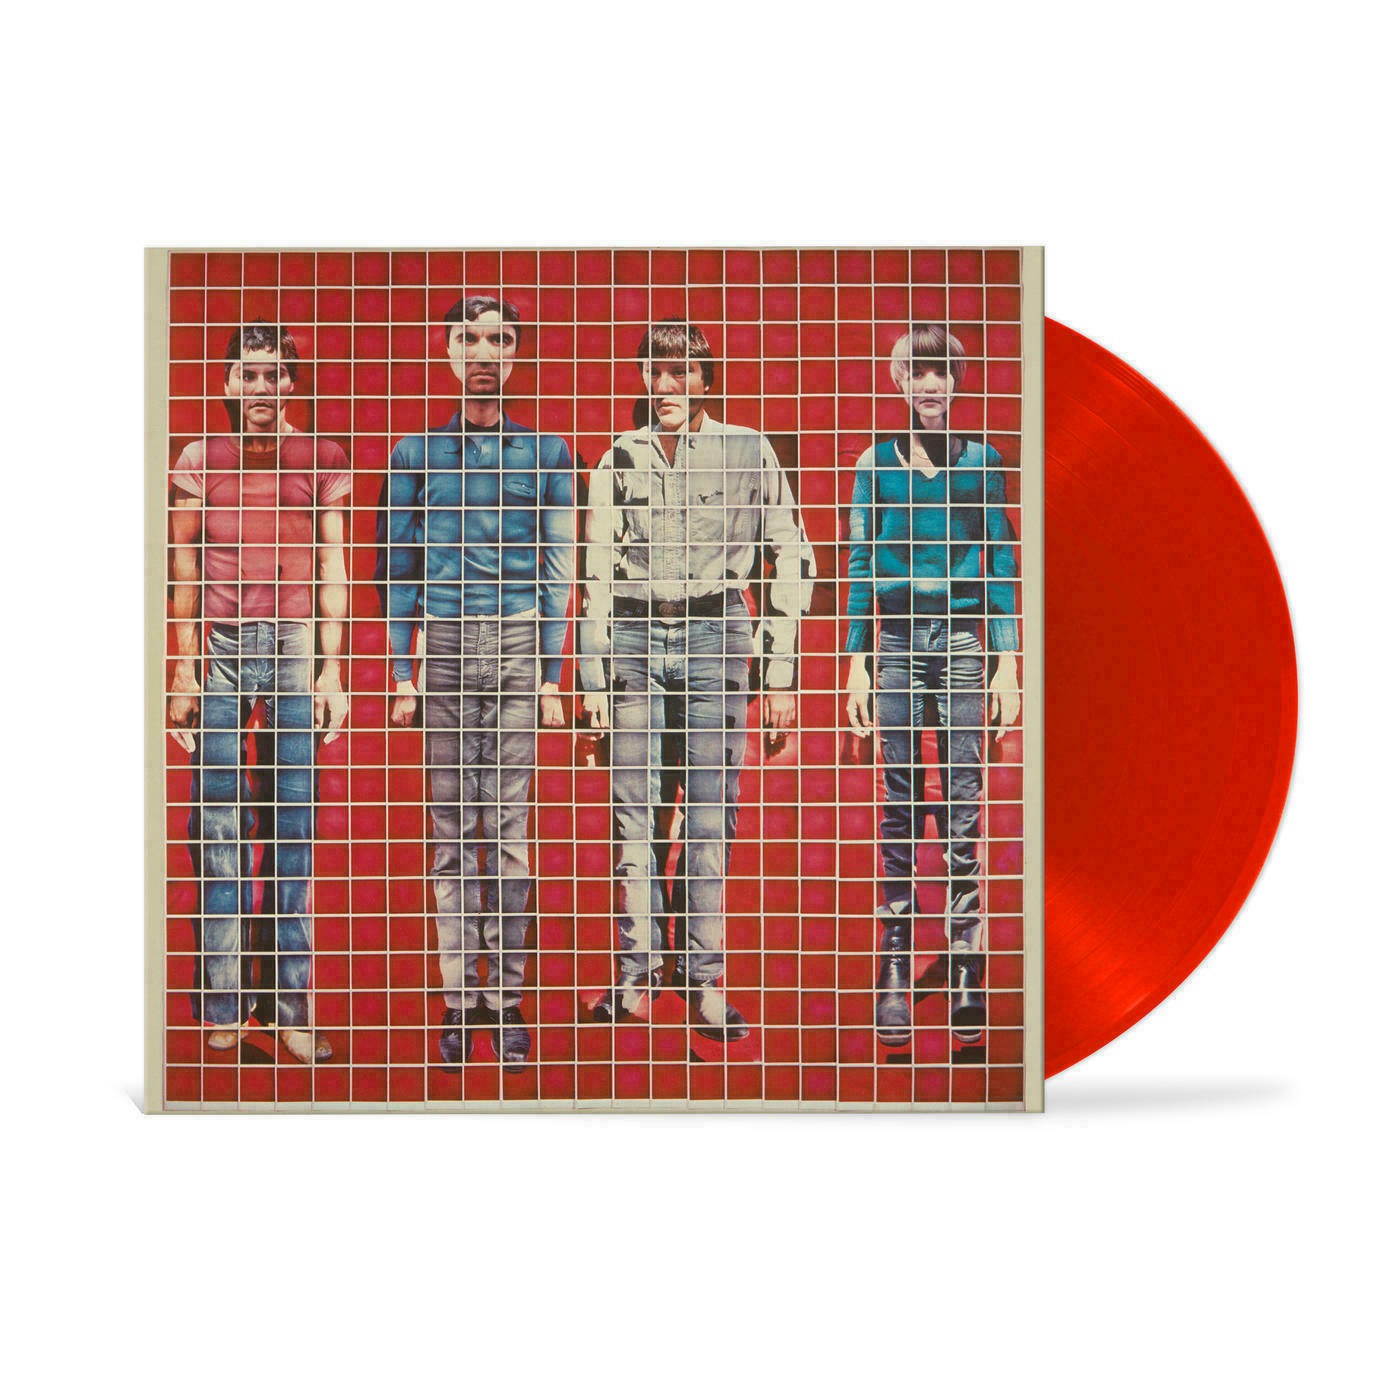 Talking Heads - More Songs About Buildings And Food (Red Vinyl) (ROCKTOBER2020)